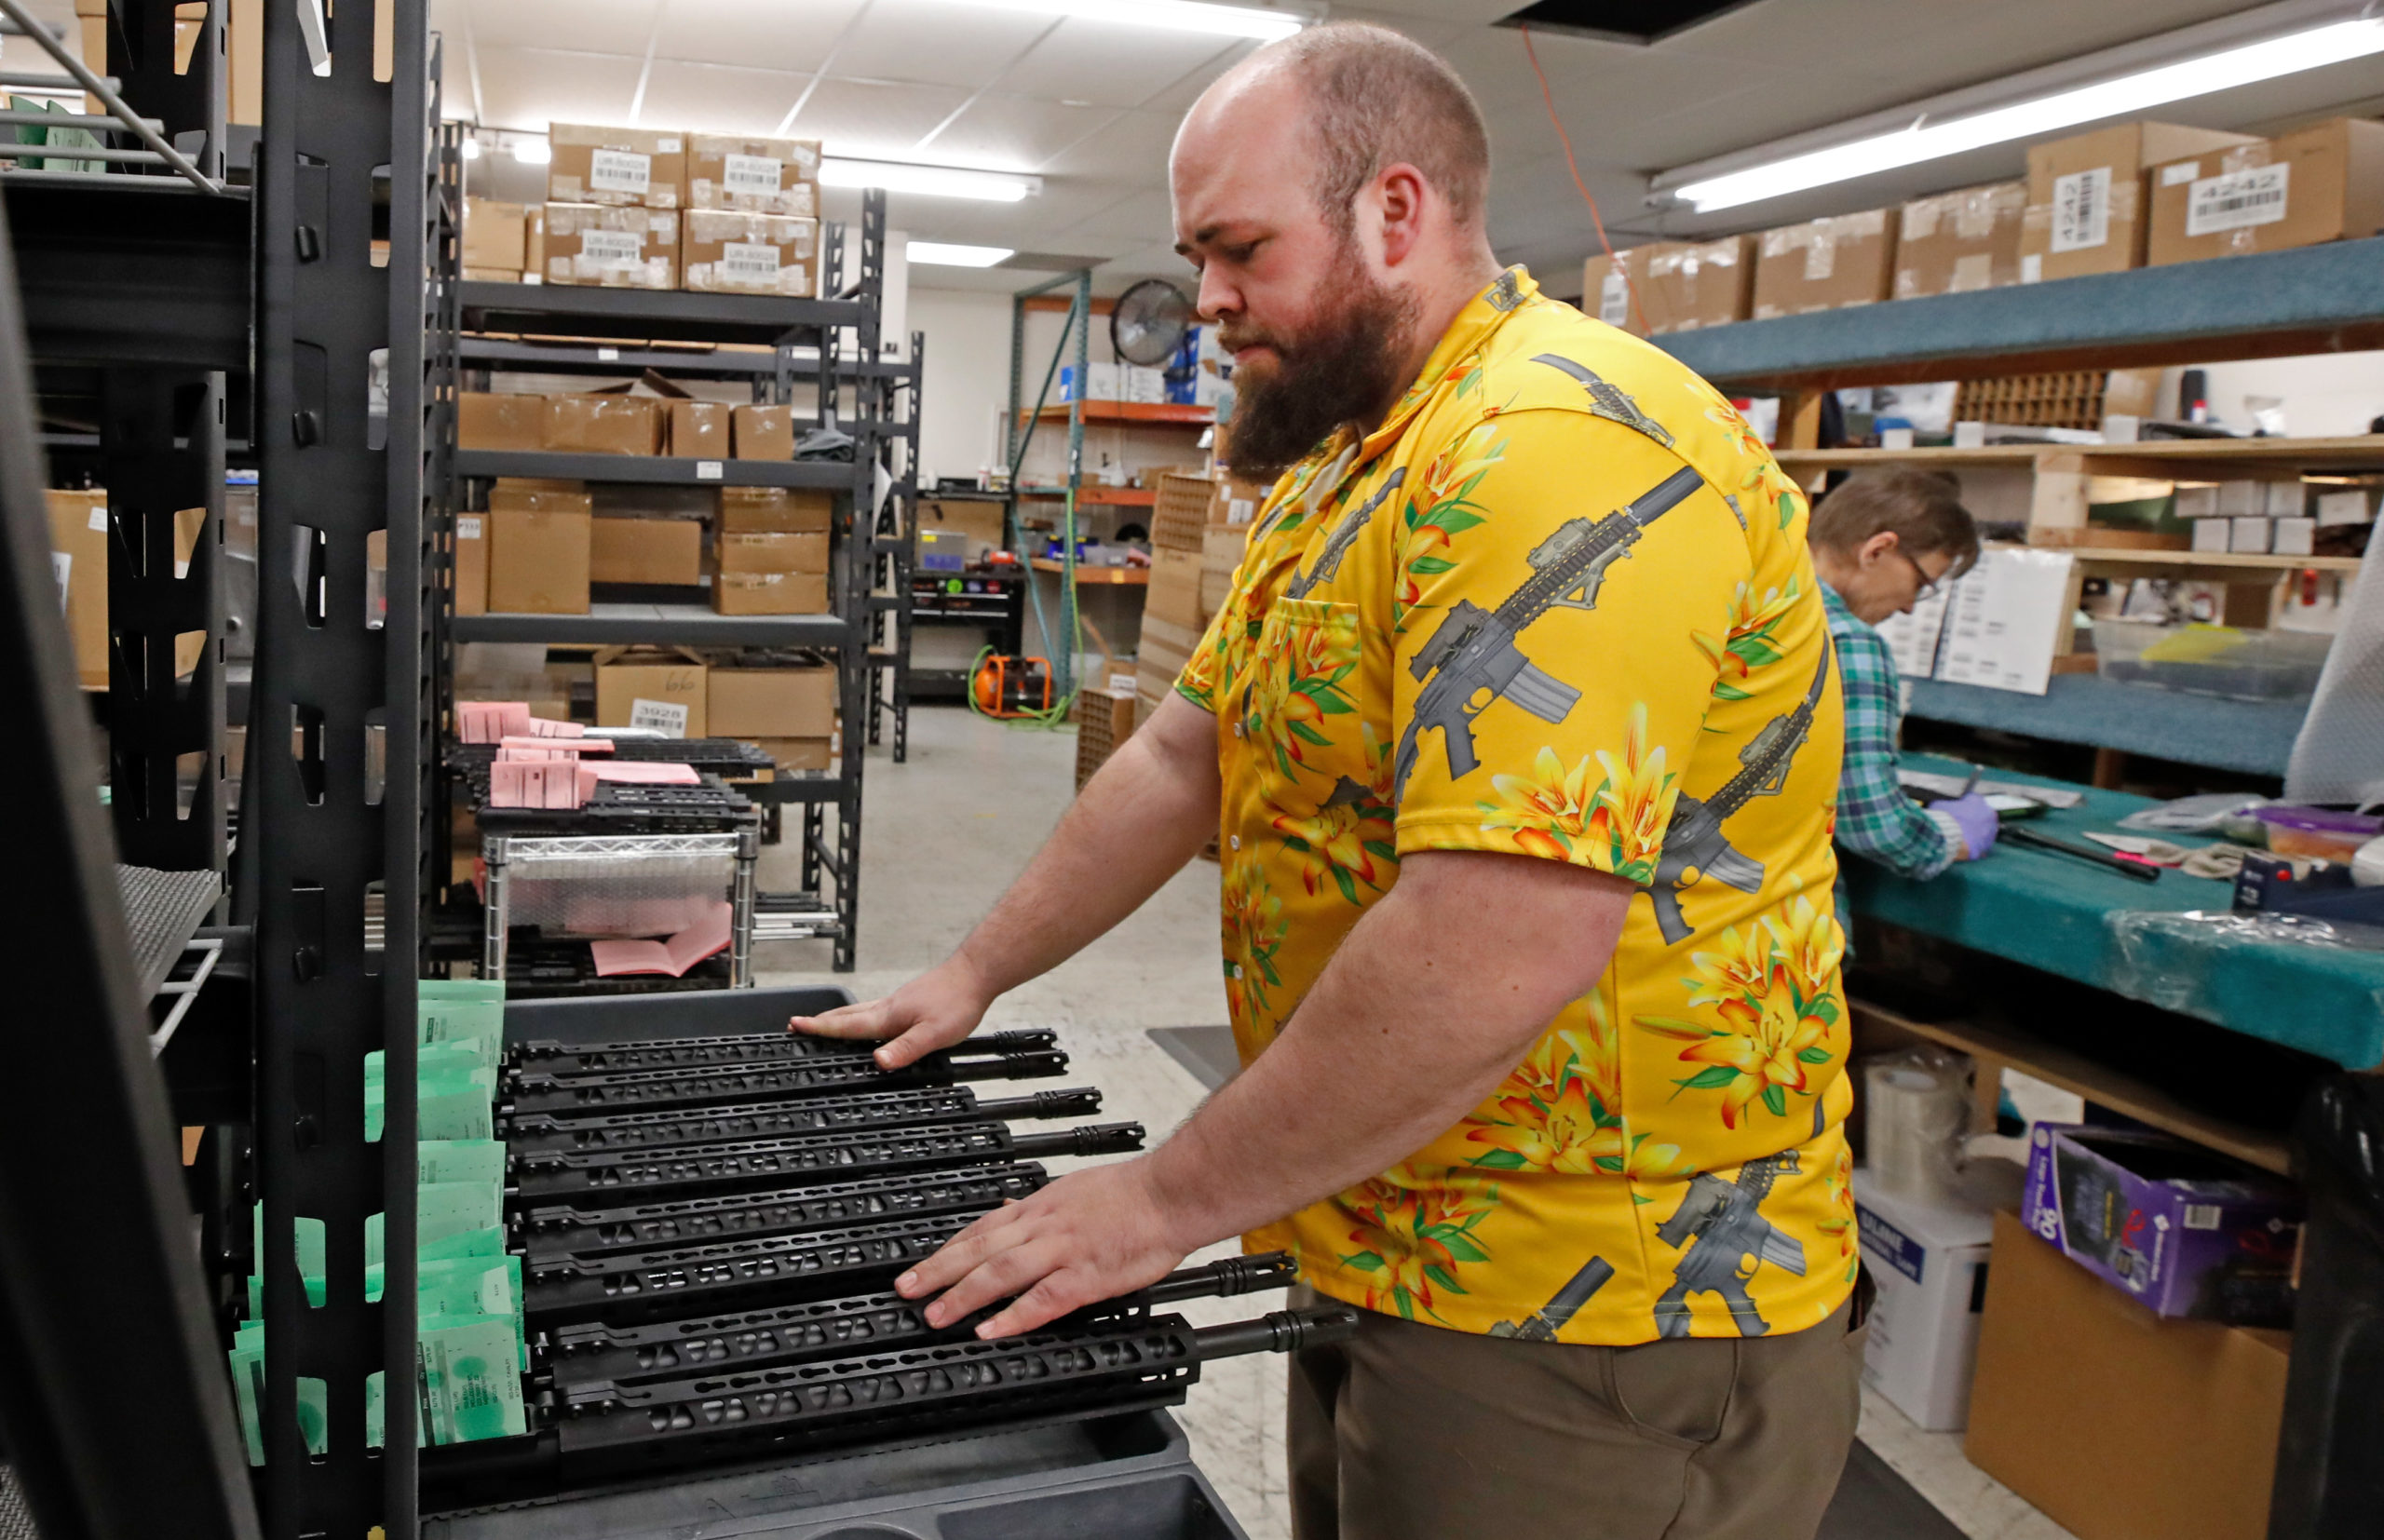 A worker moves finished AR-15 rifle uppers for storage at Delta Team Tactical in Orem, Utah on March 20, 2020. - Gun stores in the US are reporting a surge in sales of firearms as coronavirus fears trigger personal safety concerns. Delta Team Tactical has experienced a 3-4 times increase in gun sales and orders since the start of the COVID-19 crisis. (GEORGE FREY/AFP via Getty Images)